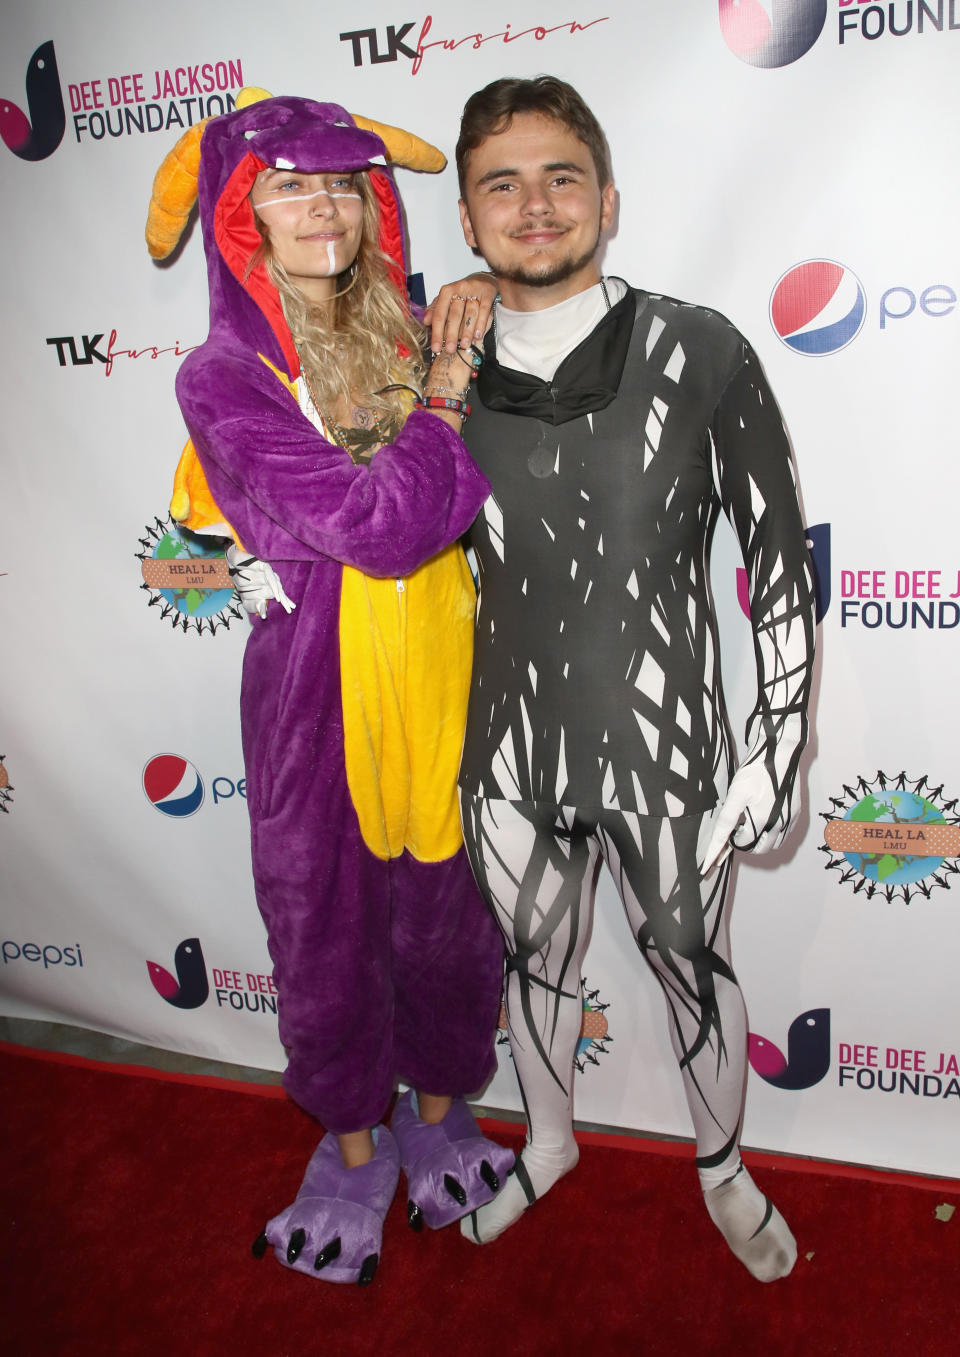 The adorable siblings dressed in onsies for a benefit at their family home over the weekend.